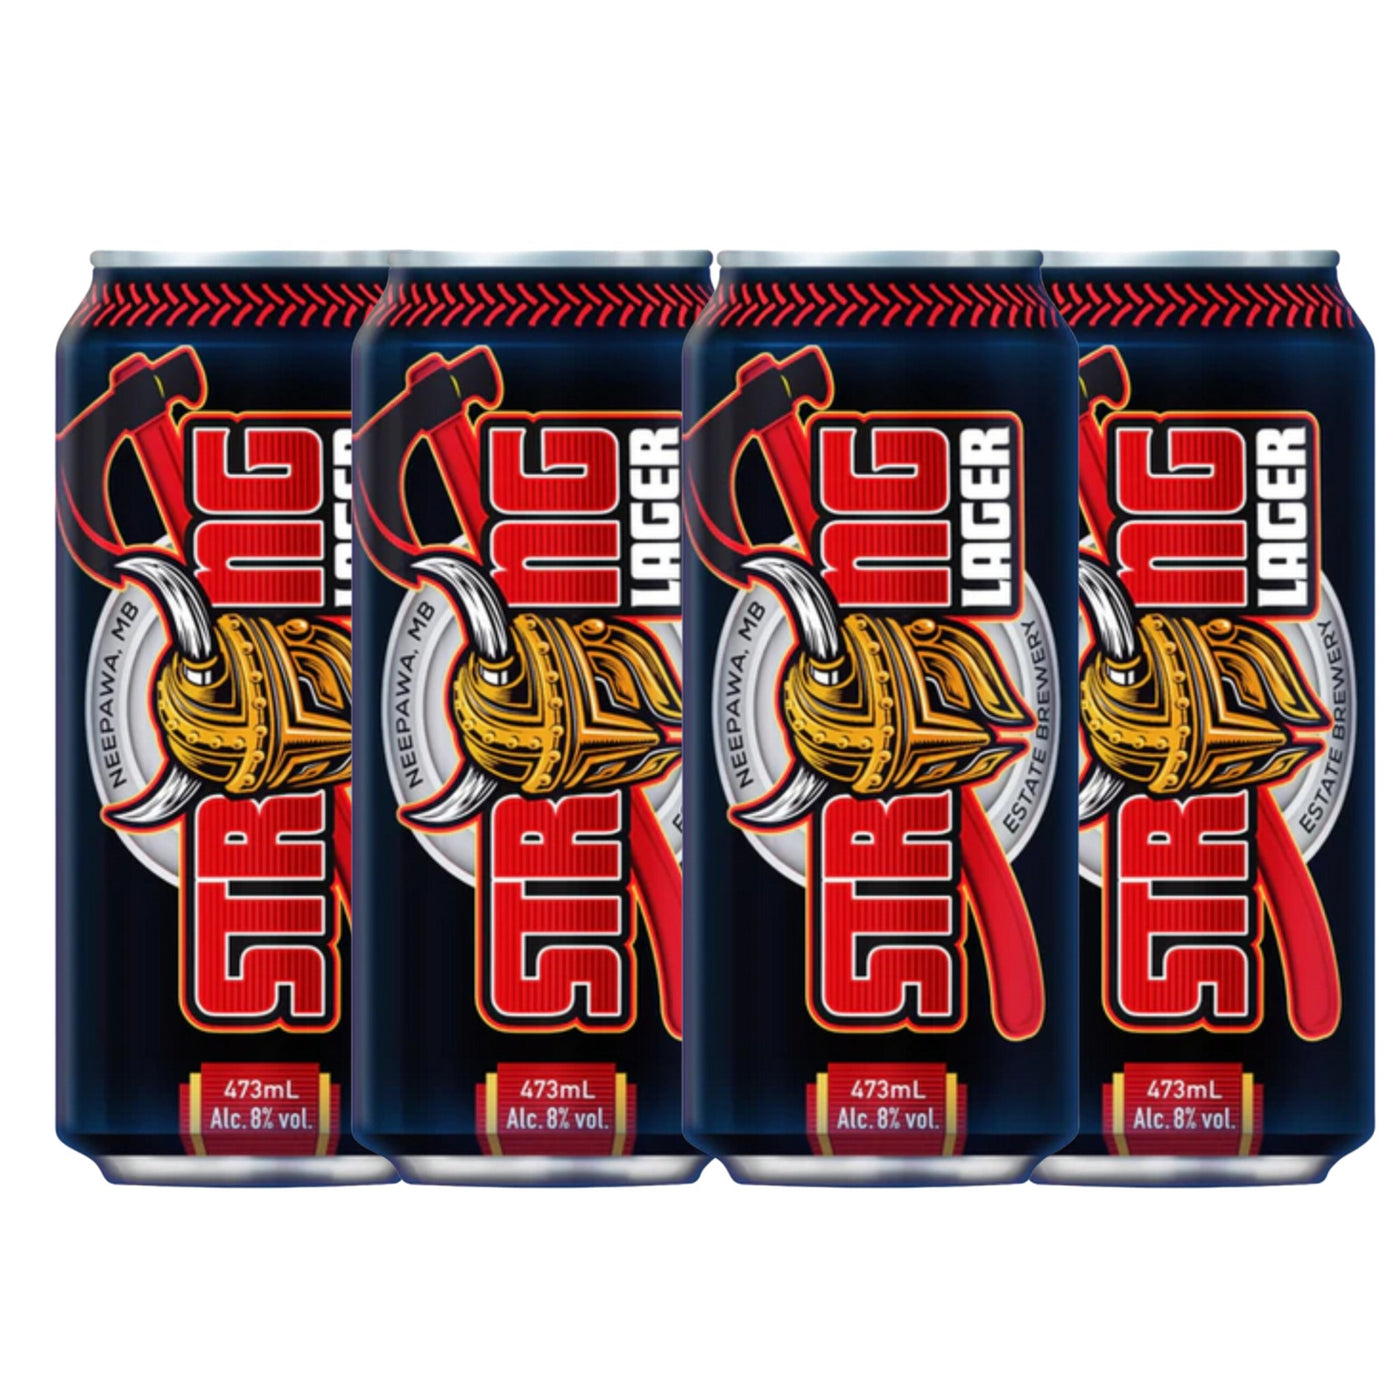 Strong 8% Lager - Farmery Estate Brewing Company Inc.-Core Beers